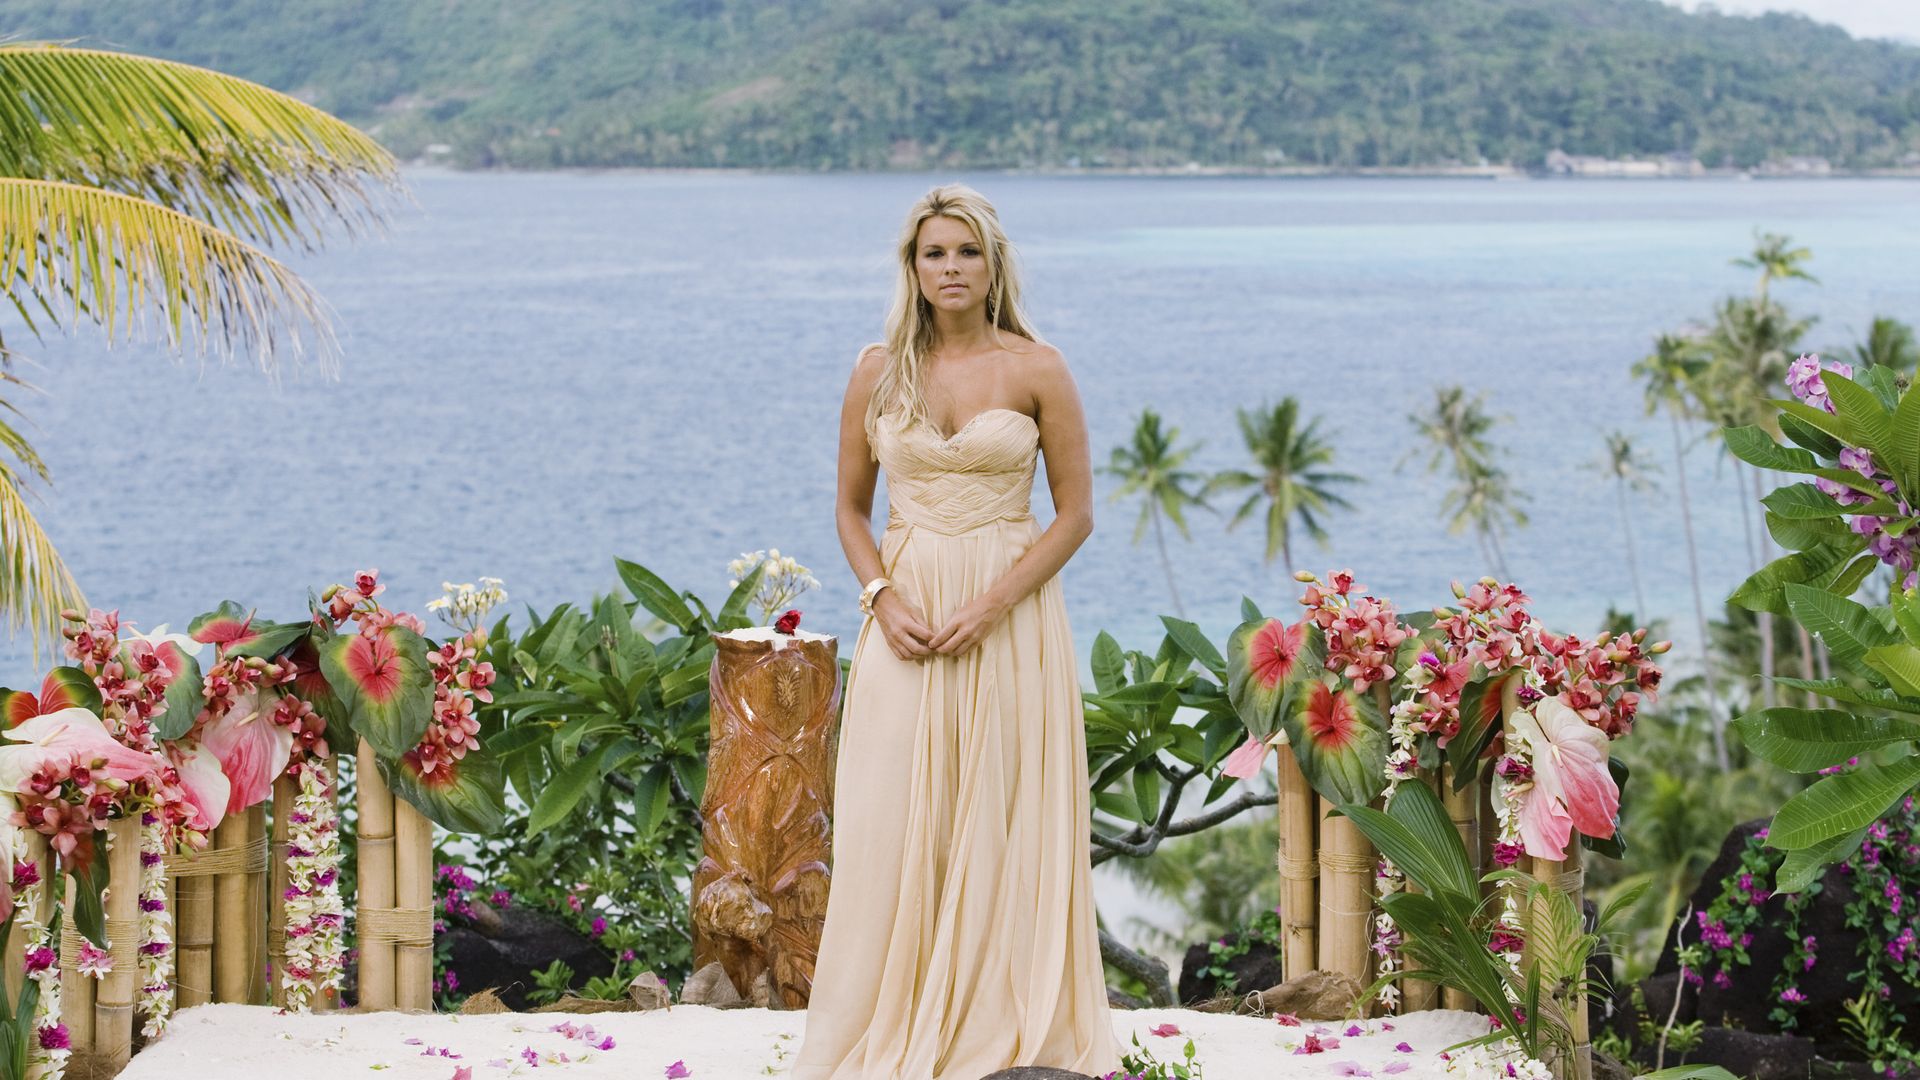 The Bachelor: The Greatest Seasons - Ever! background